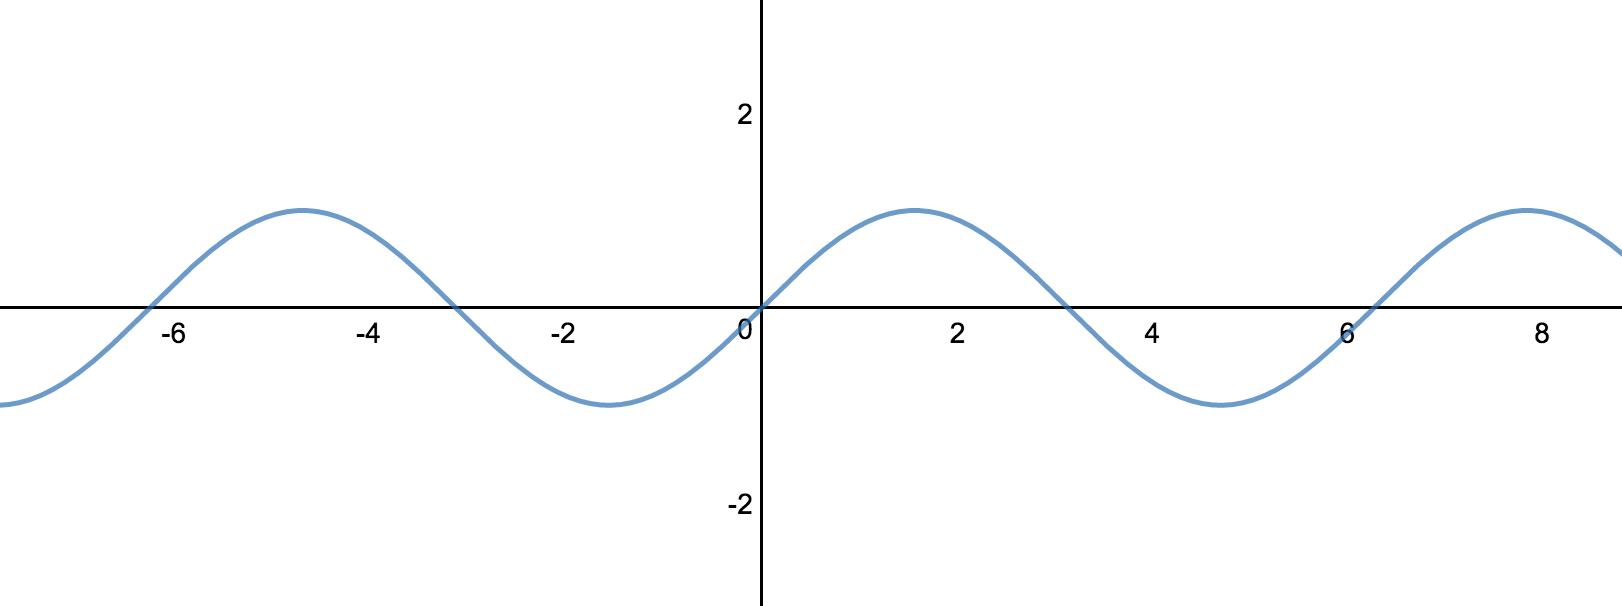 Sin of x function